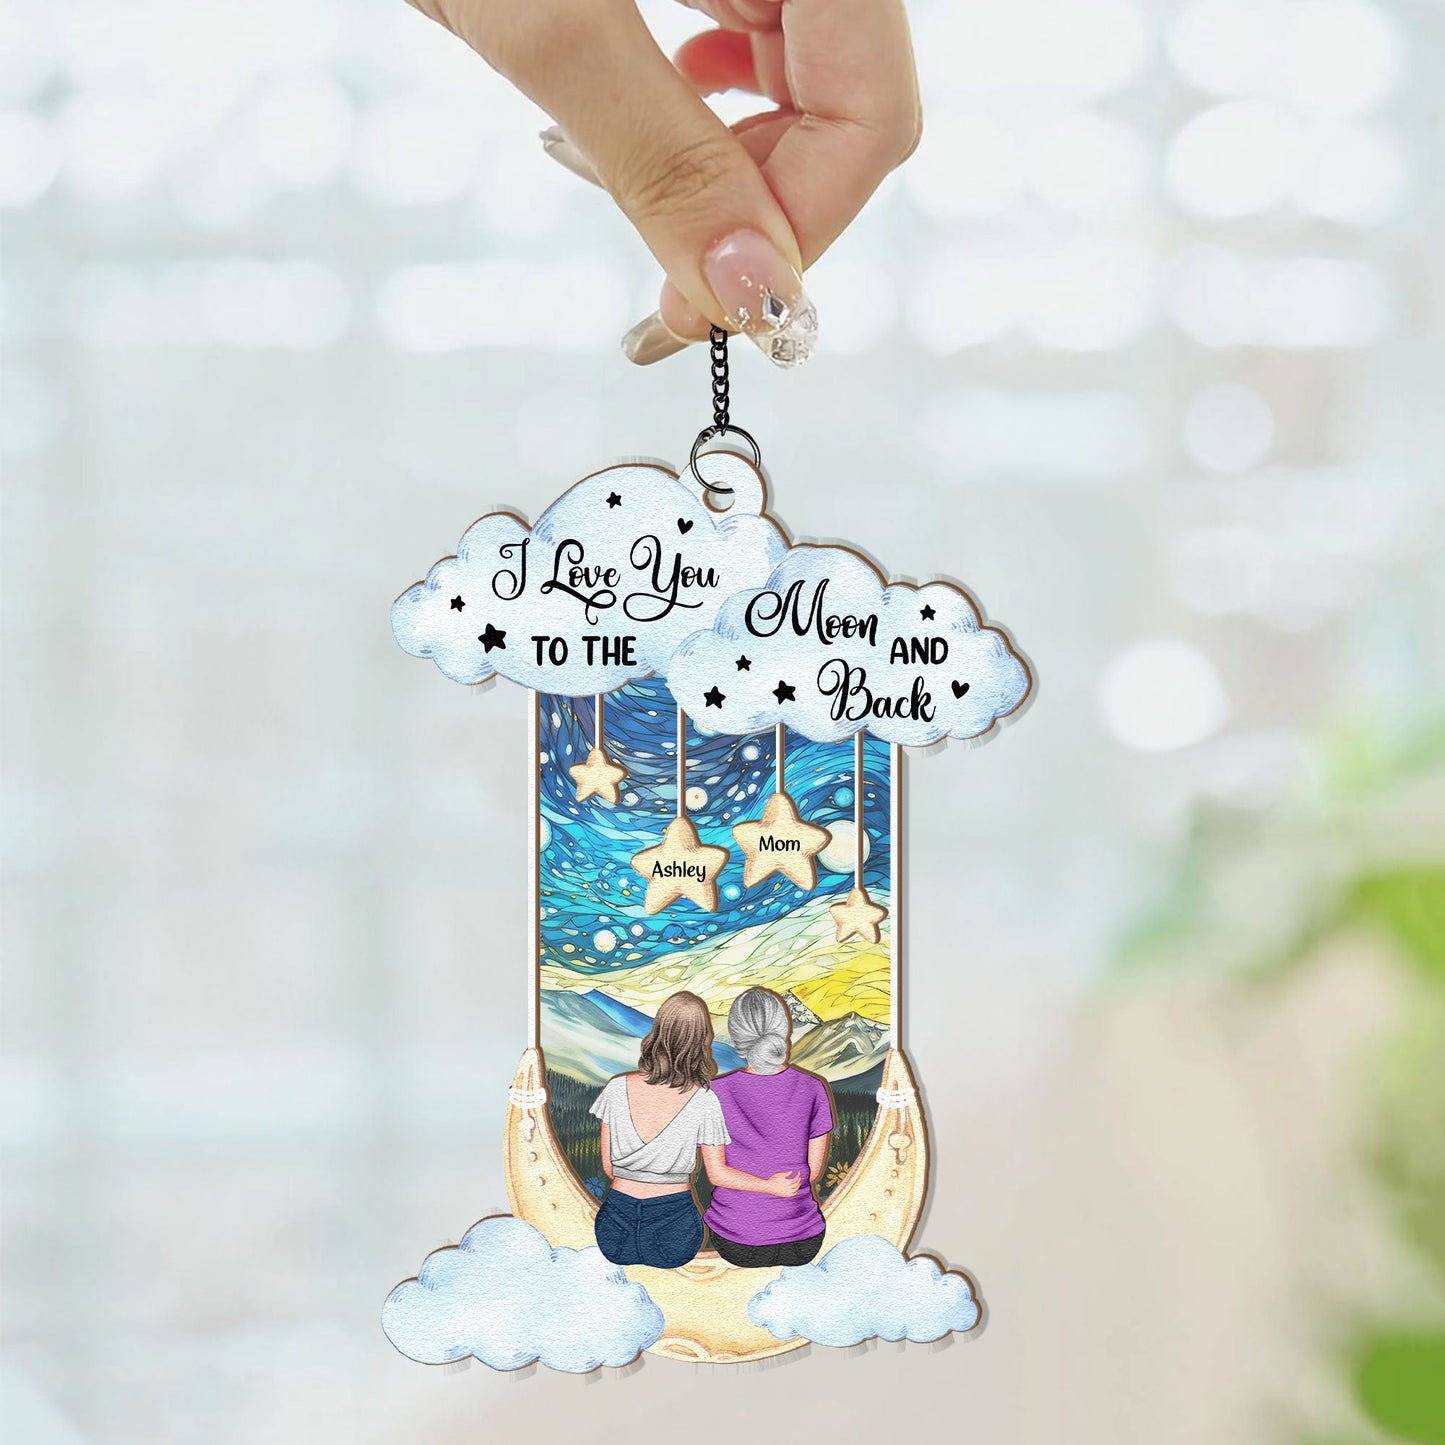 I Love You To The Moon & Back Mom - Personalized Window Hanging Suncatcher Ornament